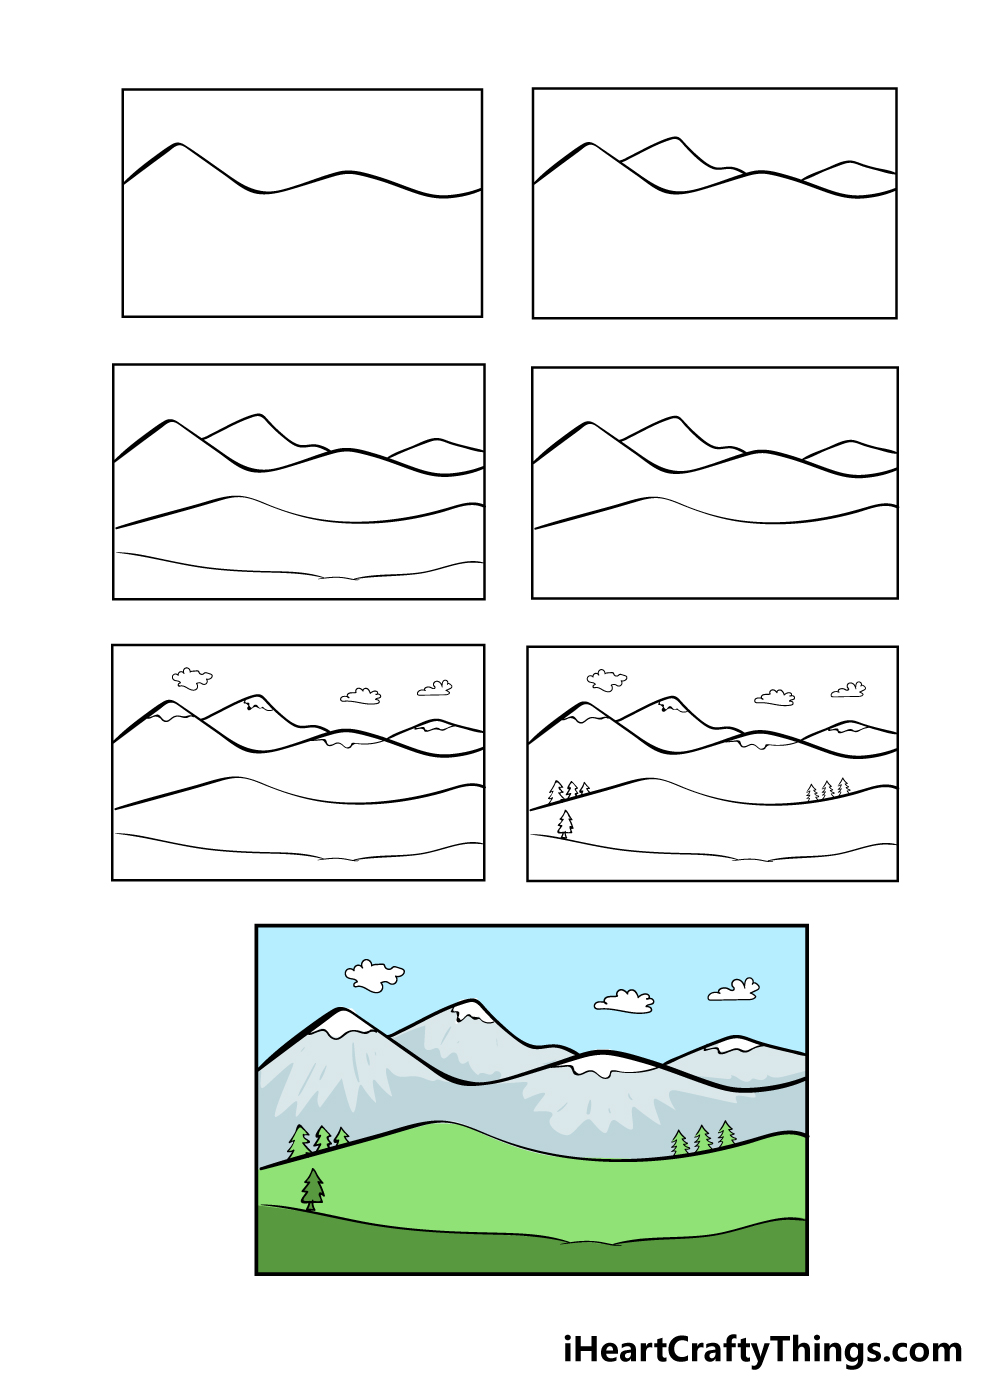 mountain in7 steps